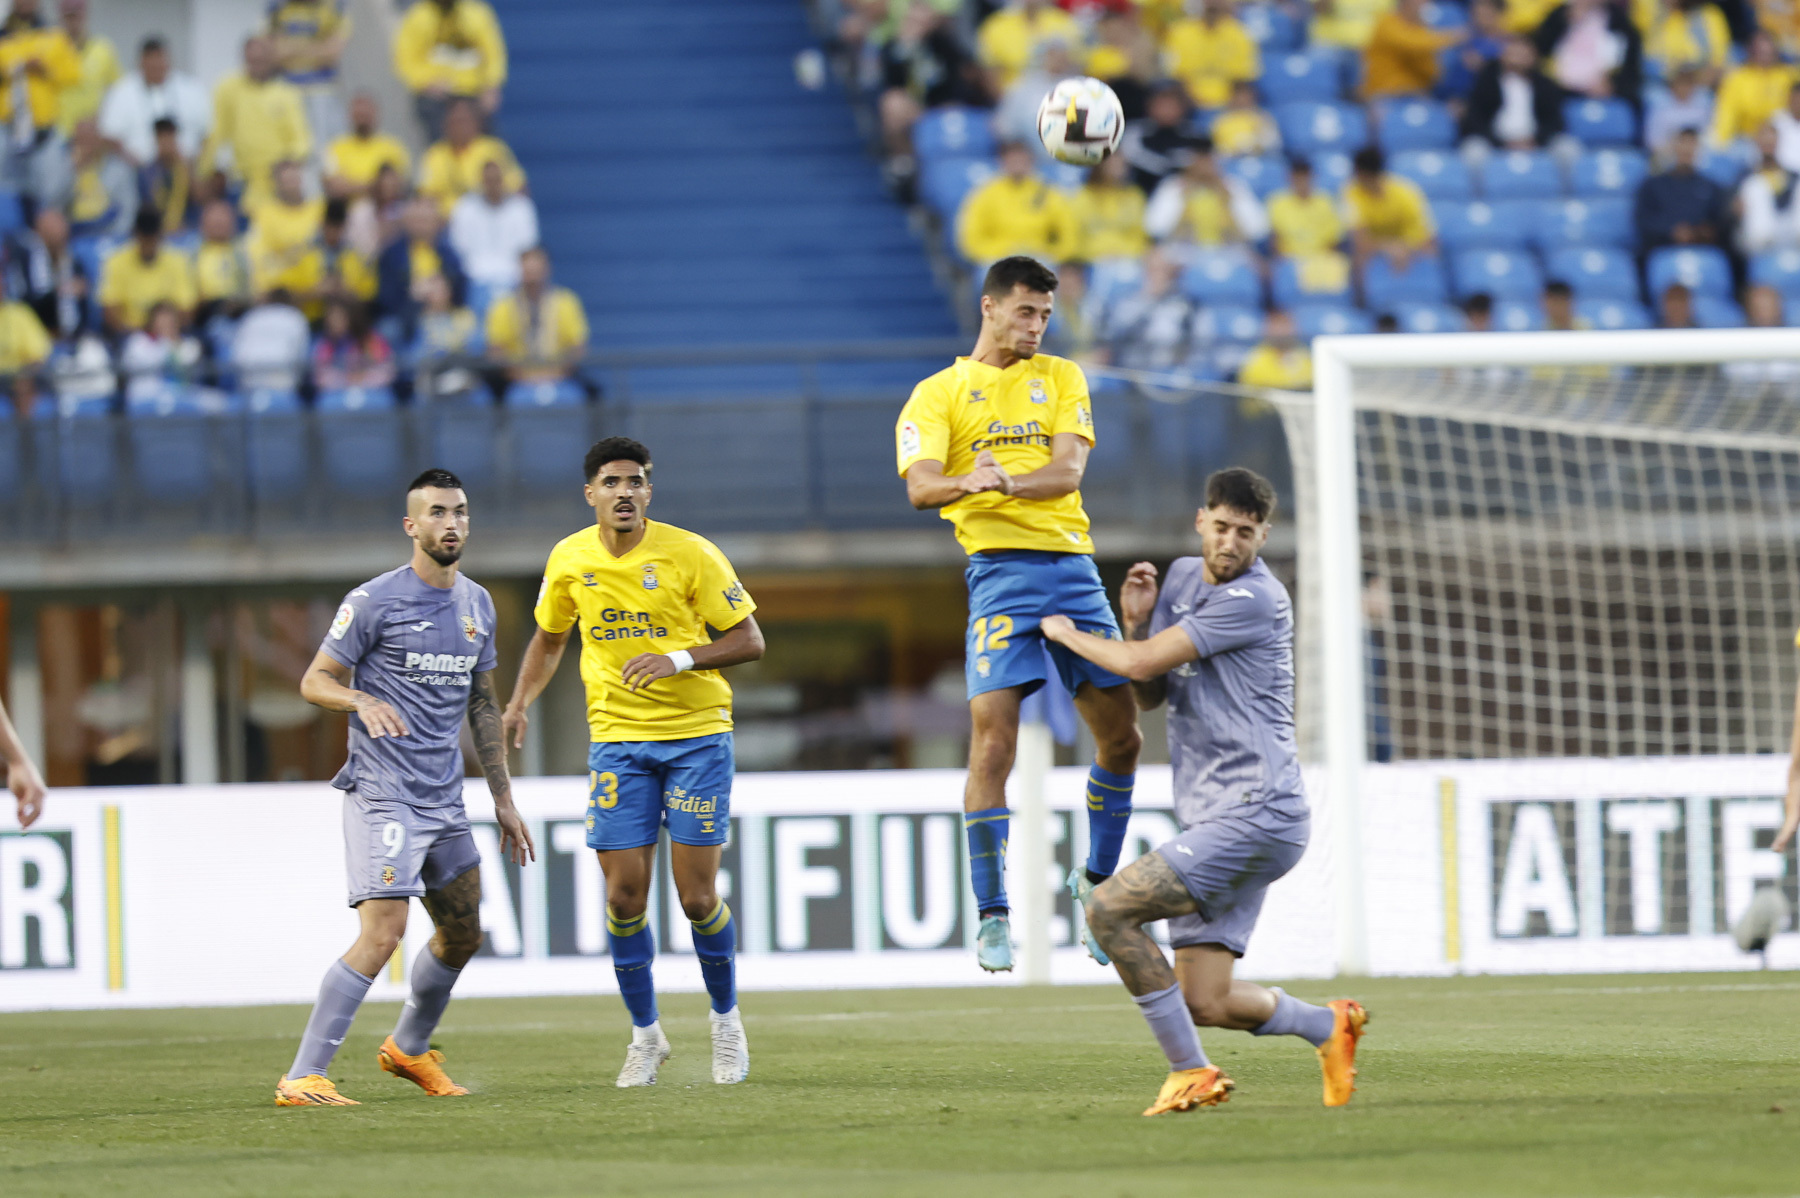 Las Palmas loses two points in the final stretch (1-1)